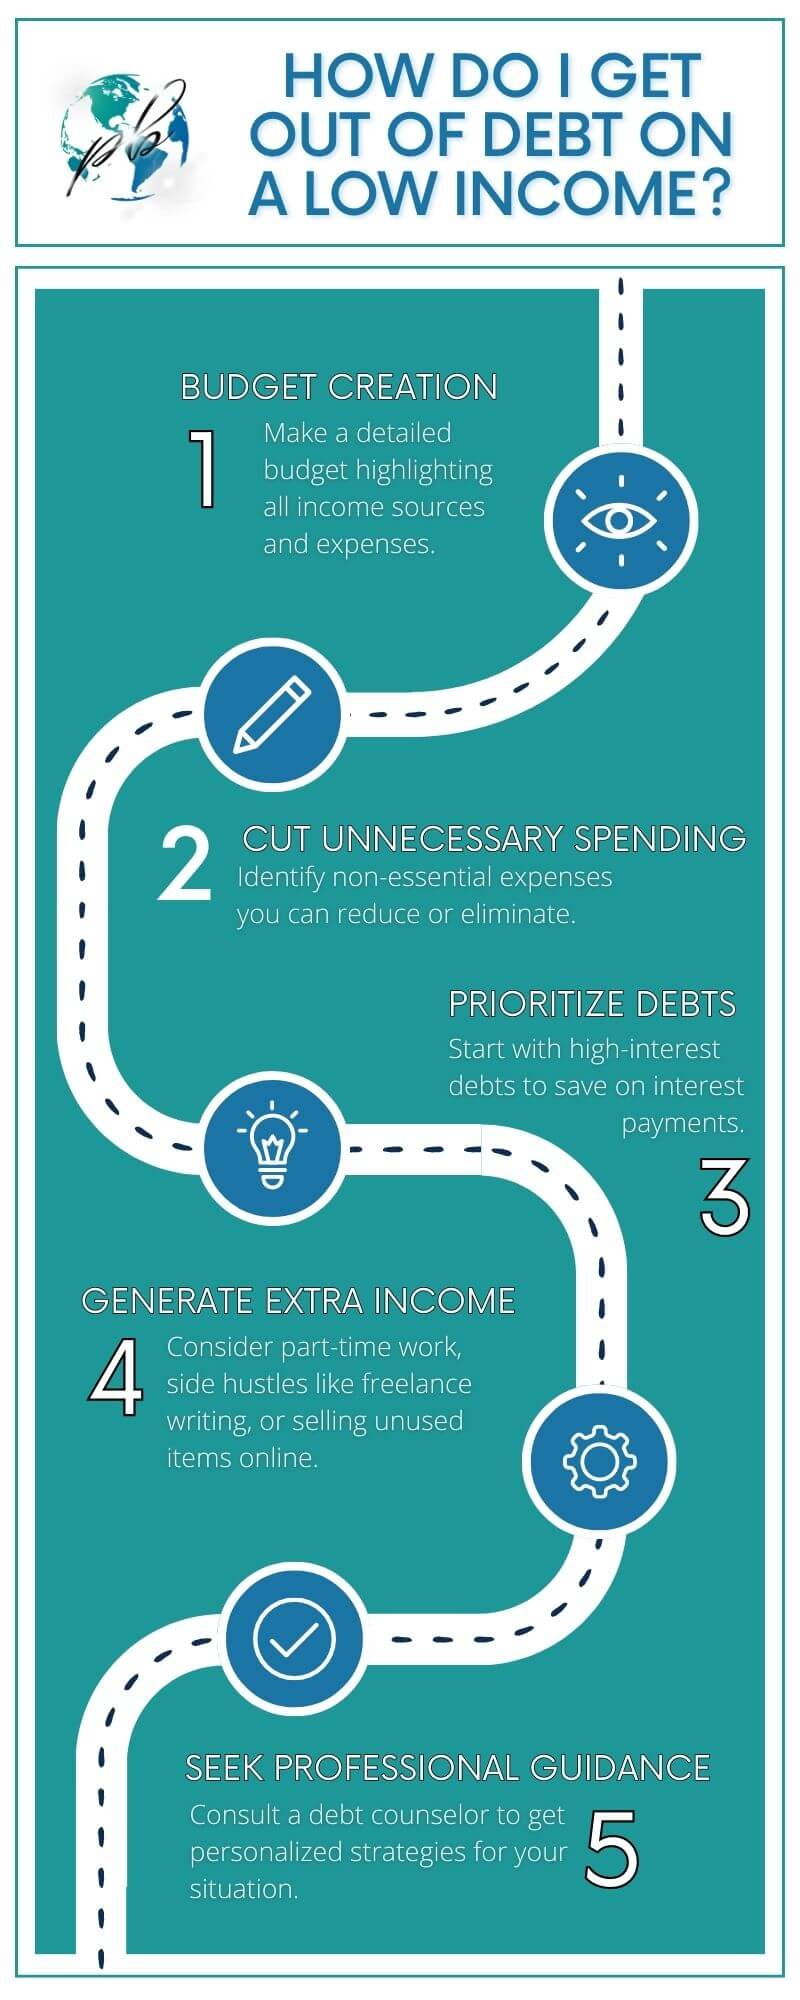 How do I get out of debt on a low income infographic